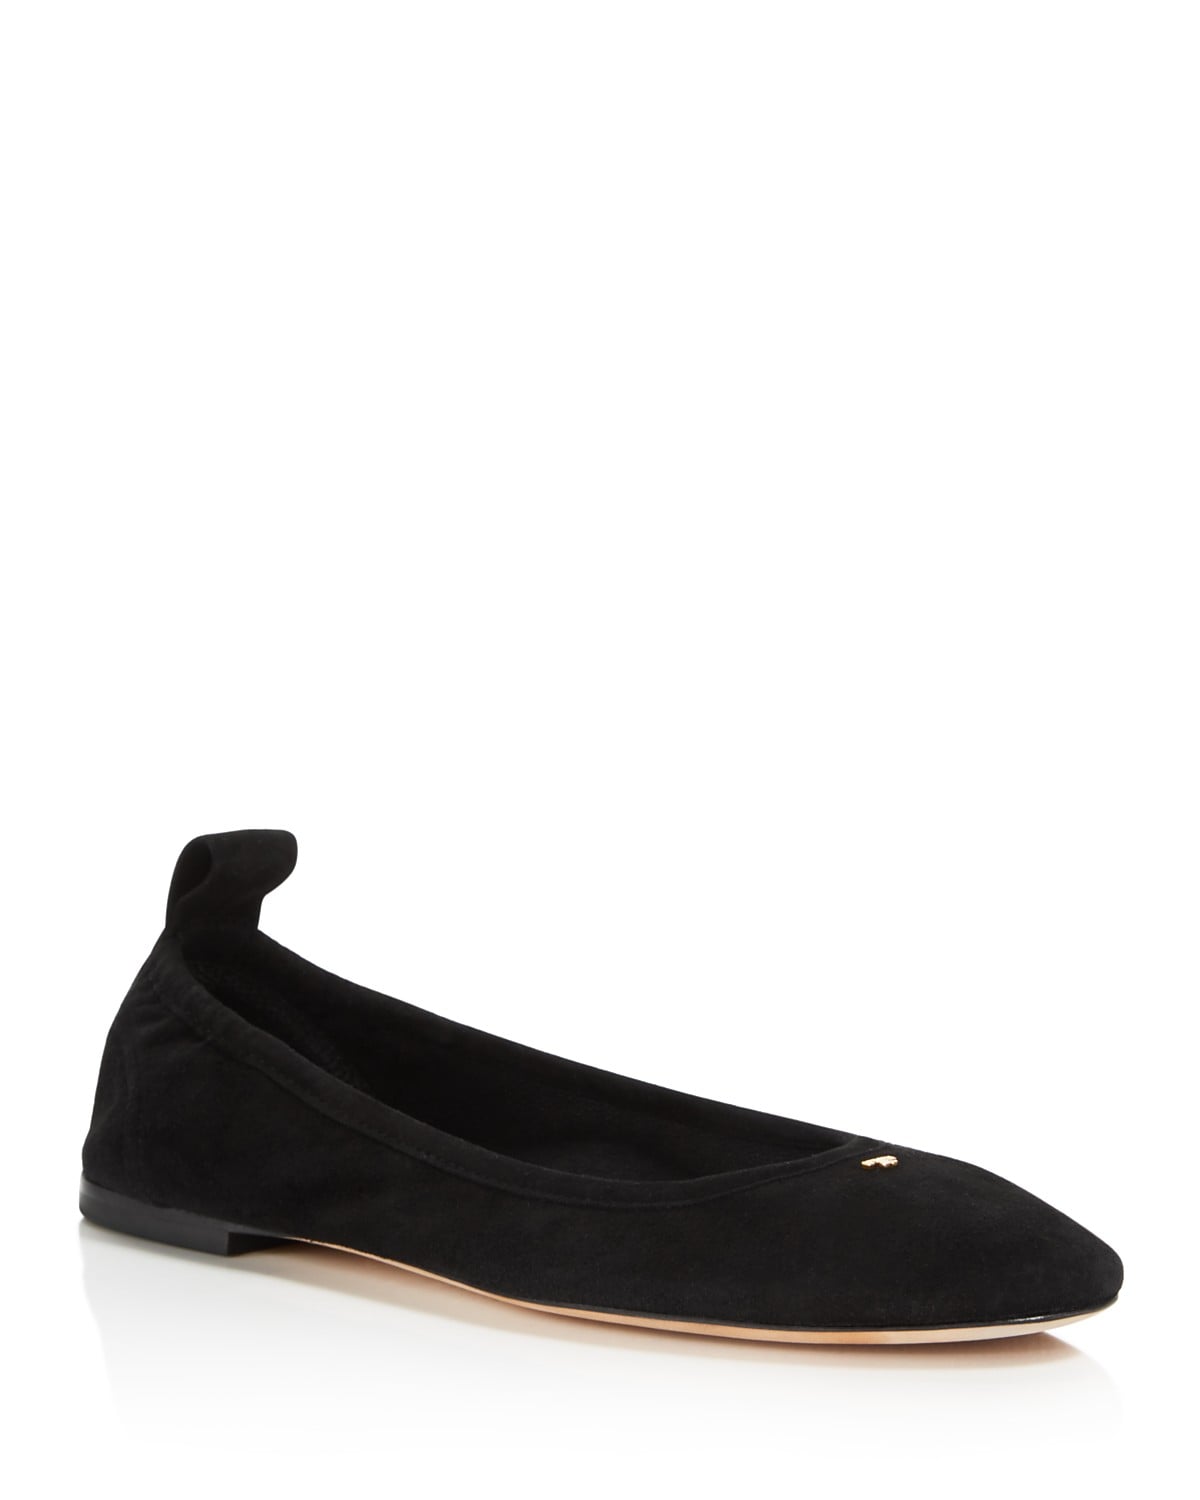 Tory Burch Therese Suede Ballet Flats | Angelina Jolie's Stylish Flats  Remind Us of Something Audrey Hepburn Would Wear | POPSUGAR Fashion Photo 7